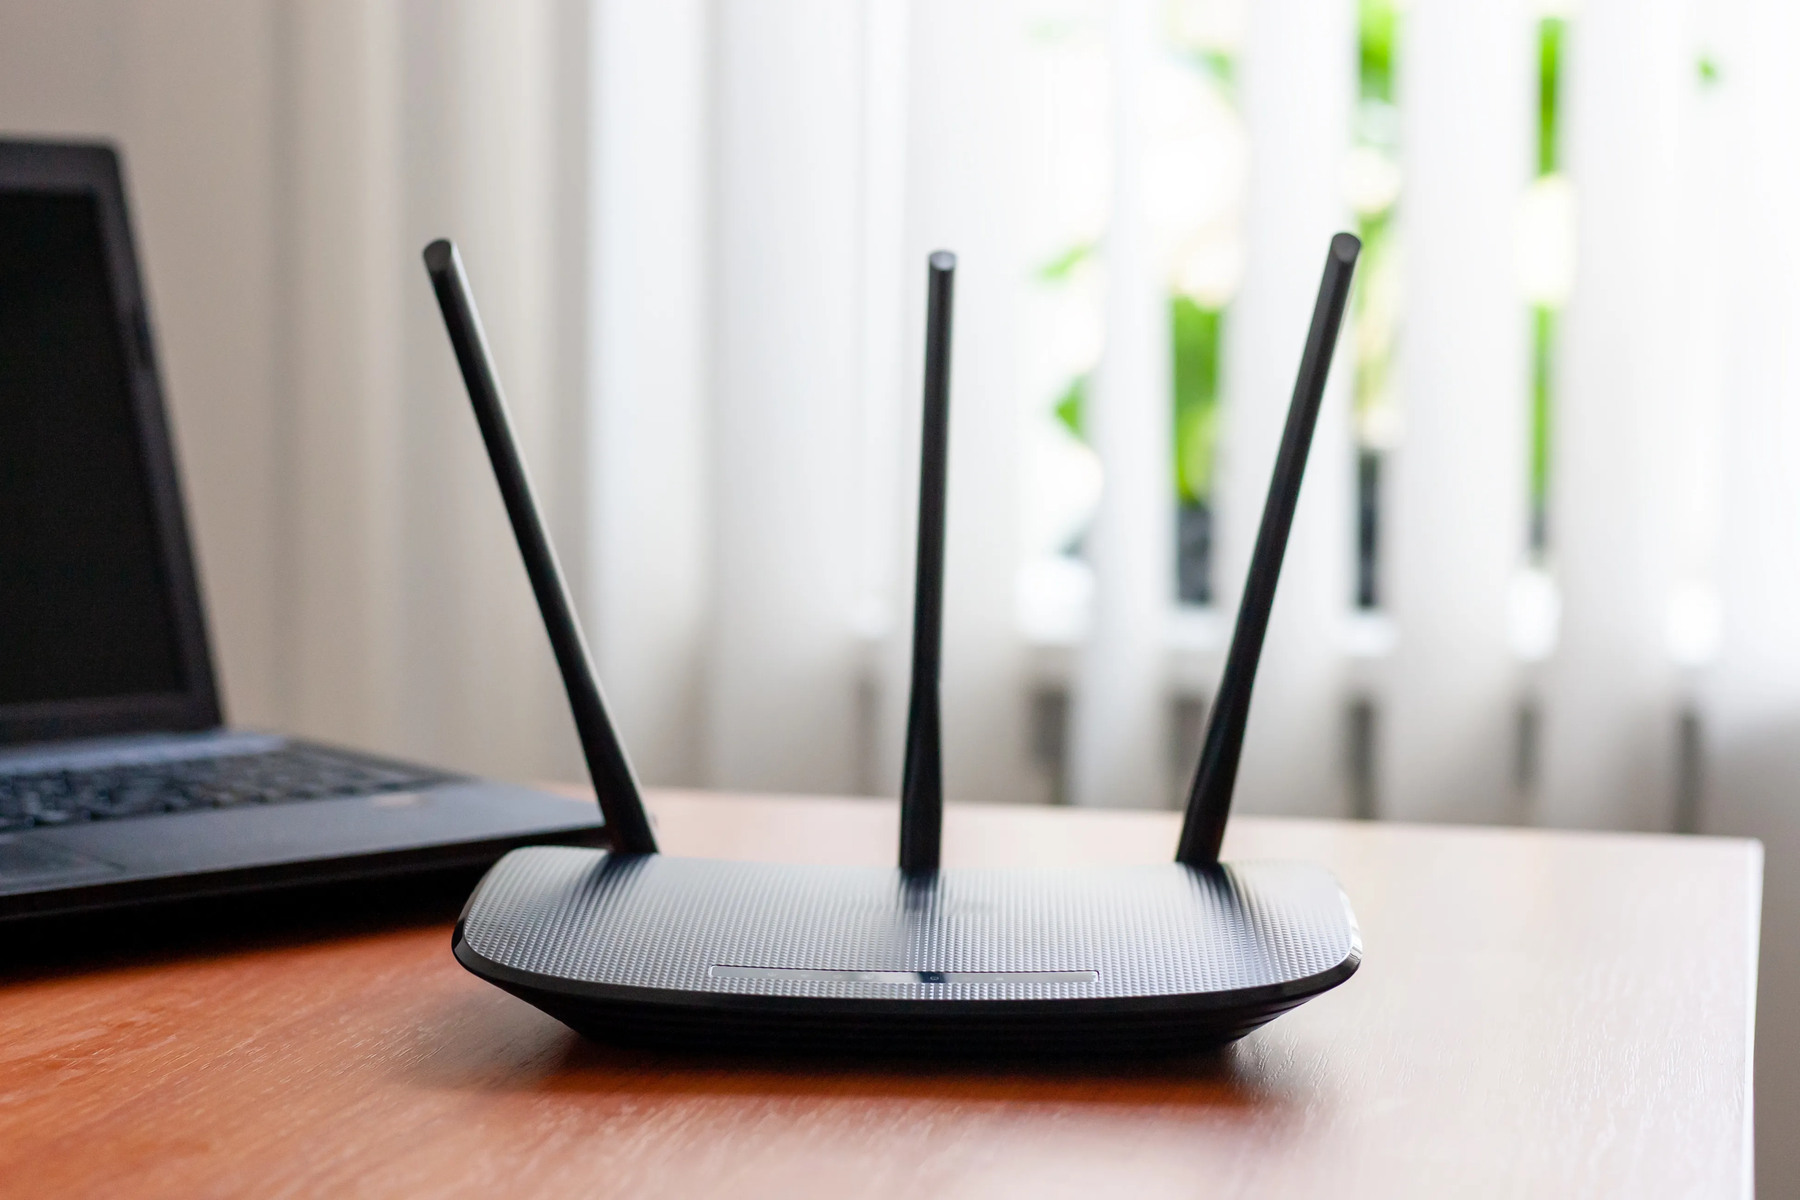 What Channel Should Wireless Router Be On